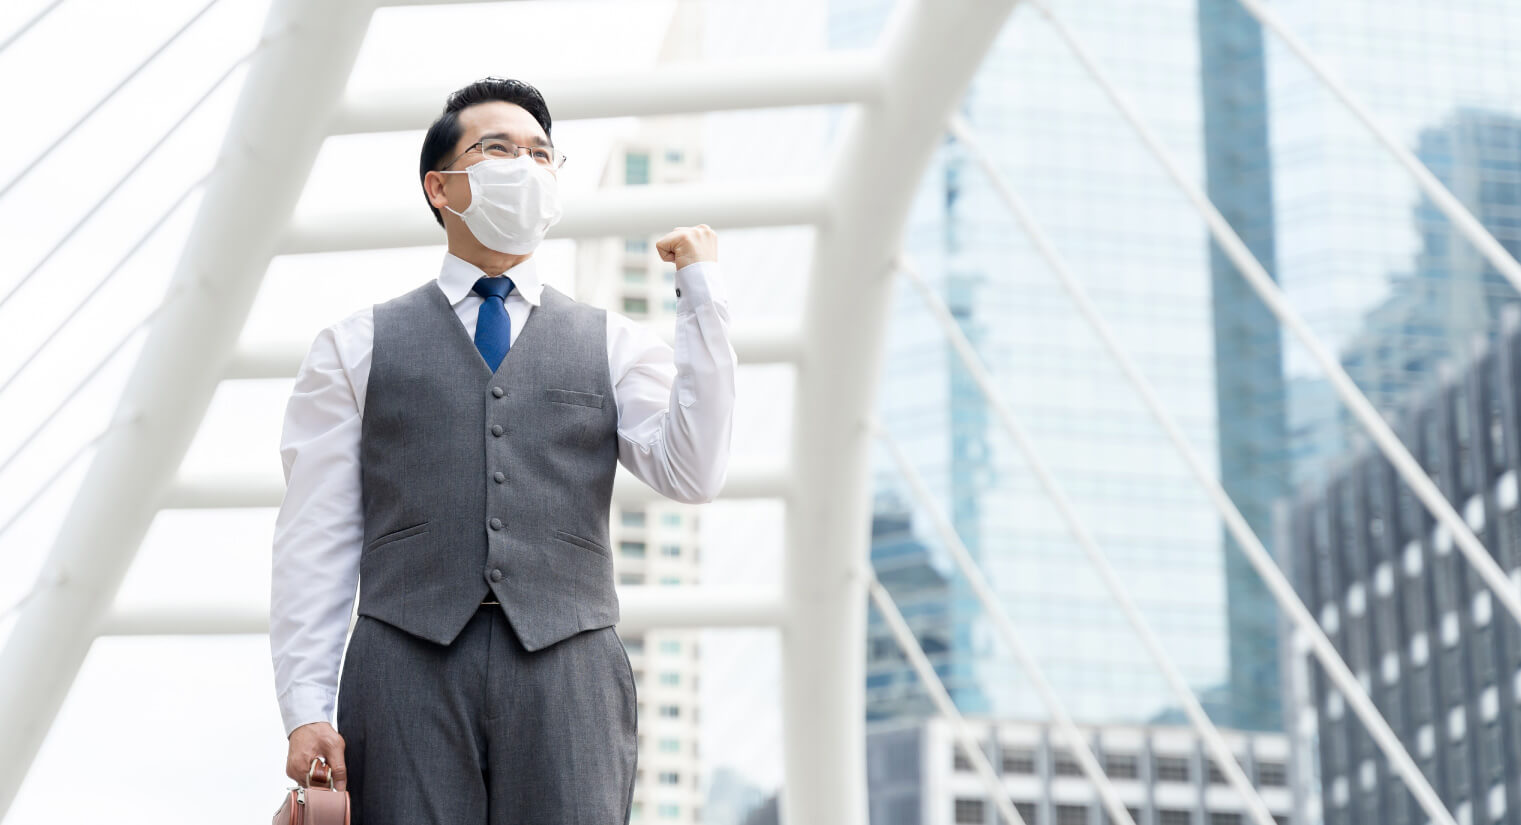 5 Most Effective Strategy to Increase Sales During Pandemic Moment